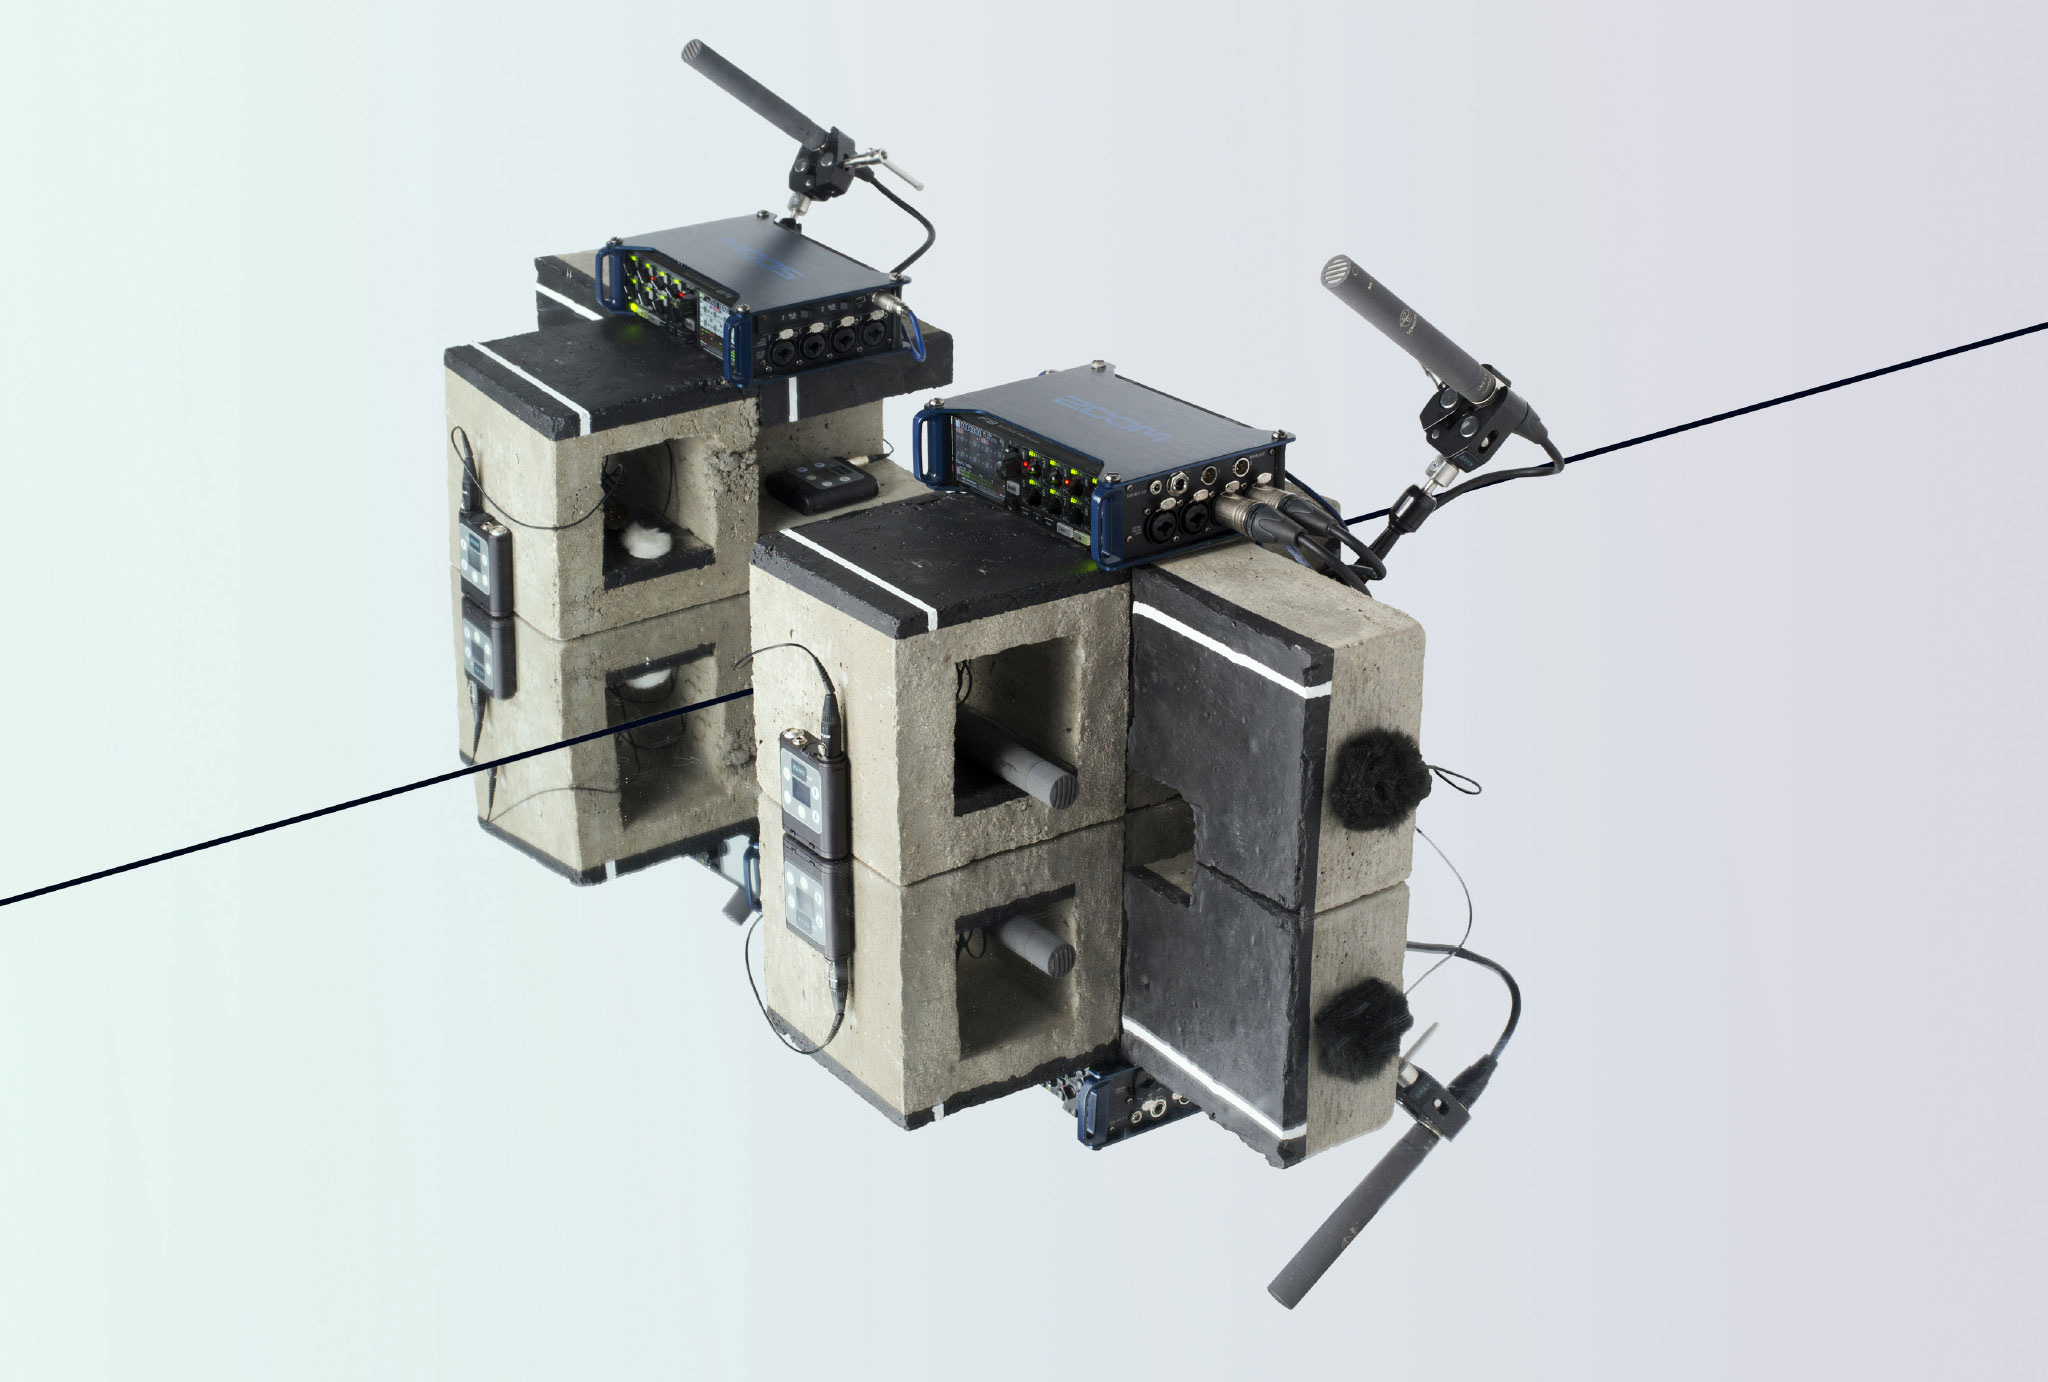 sound recording equipment on concrete blocks against a mirrored background